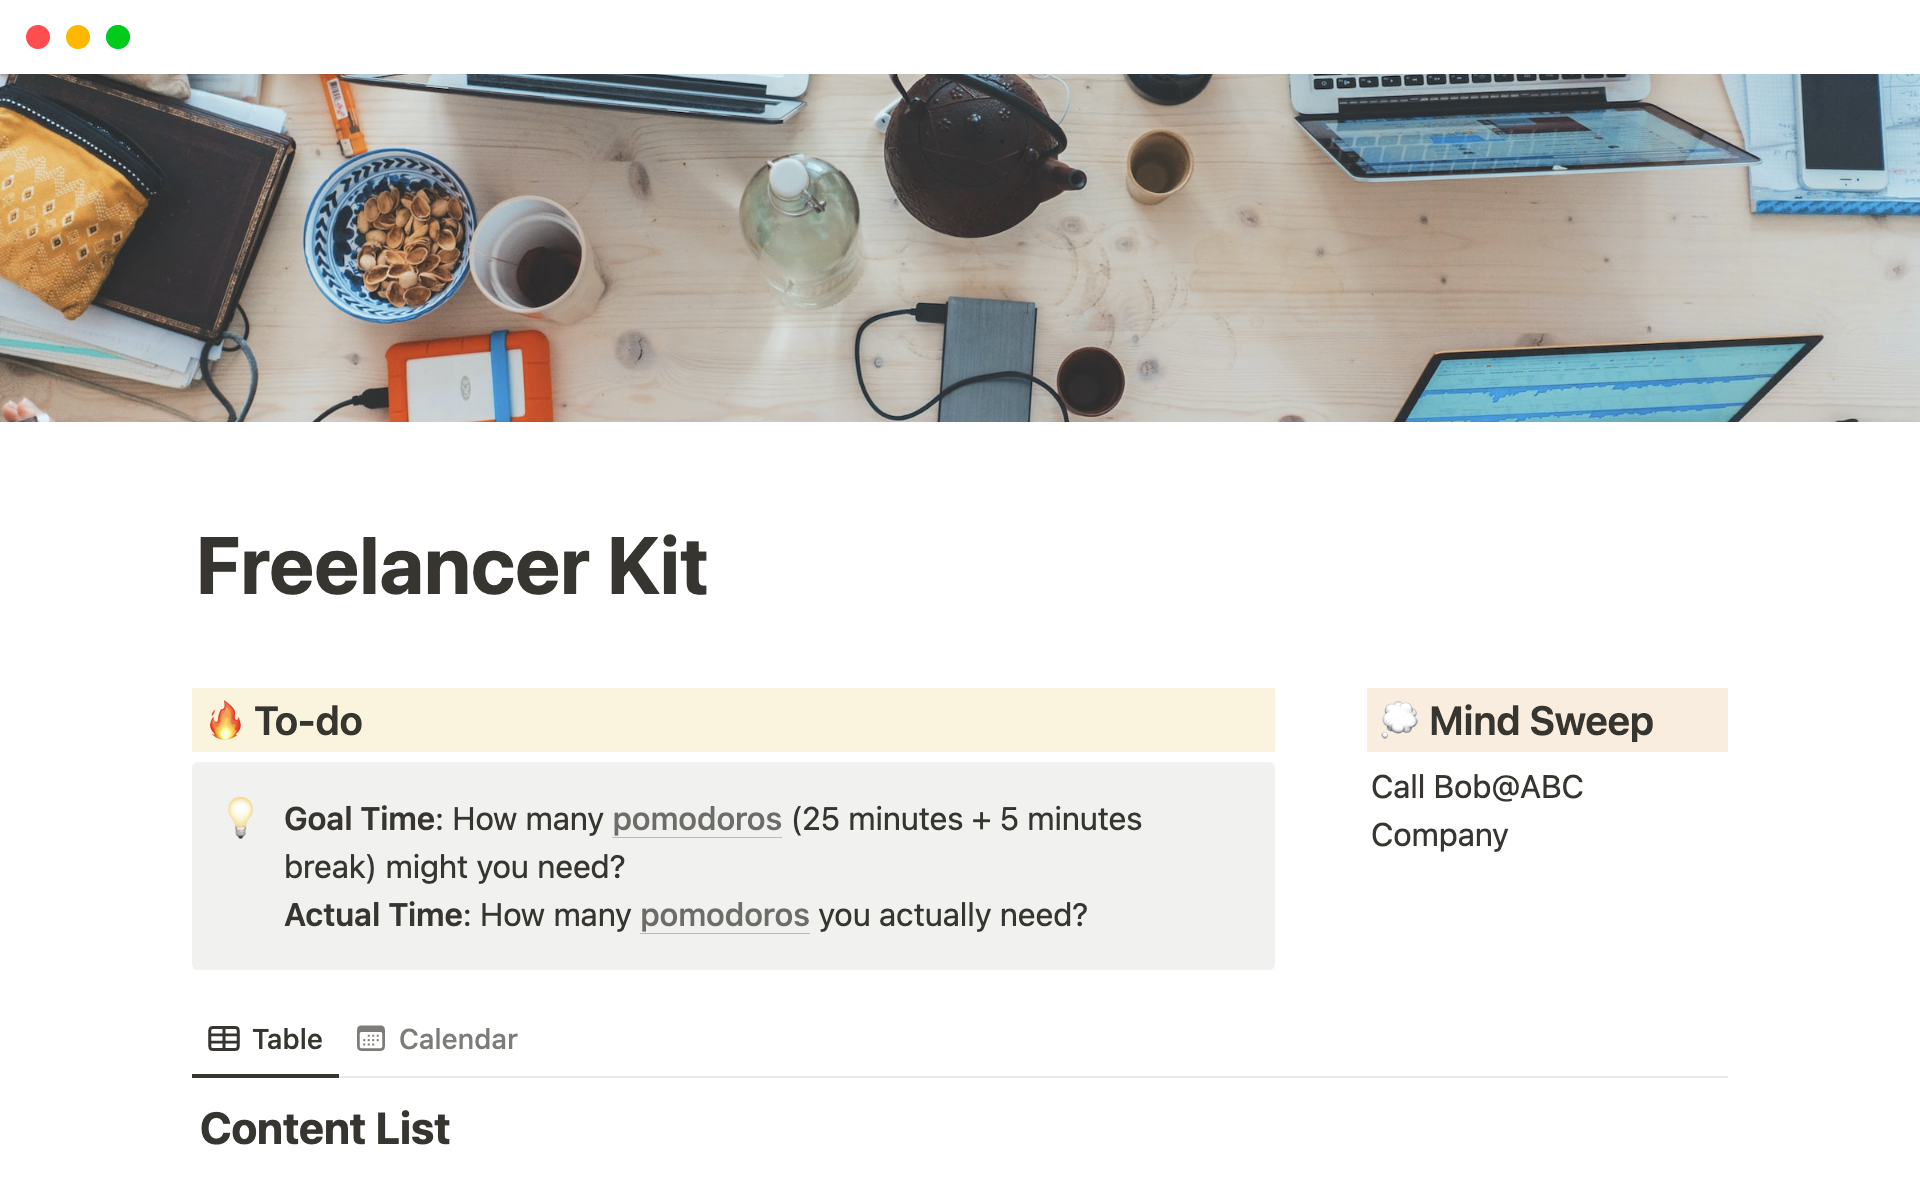 The Freelancer Kit is a comprehensive solution designed to help freelancers organize their work and increase their productivity.